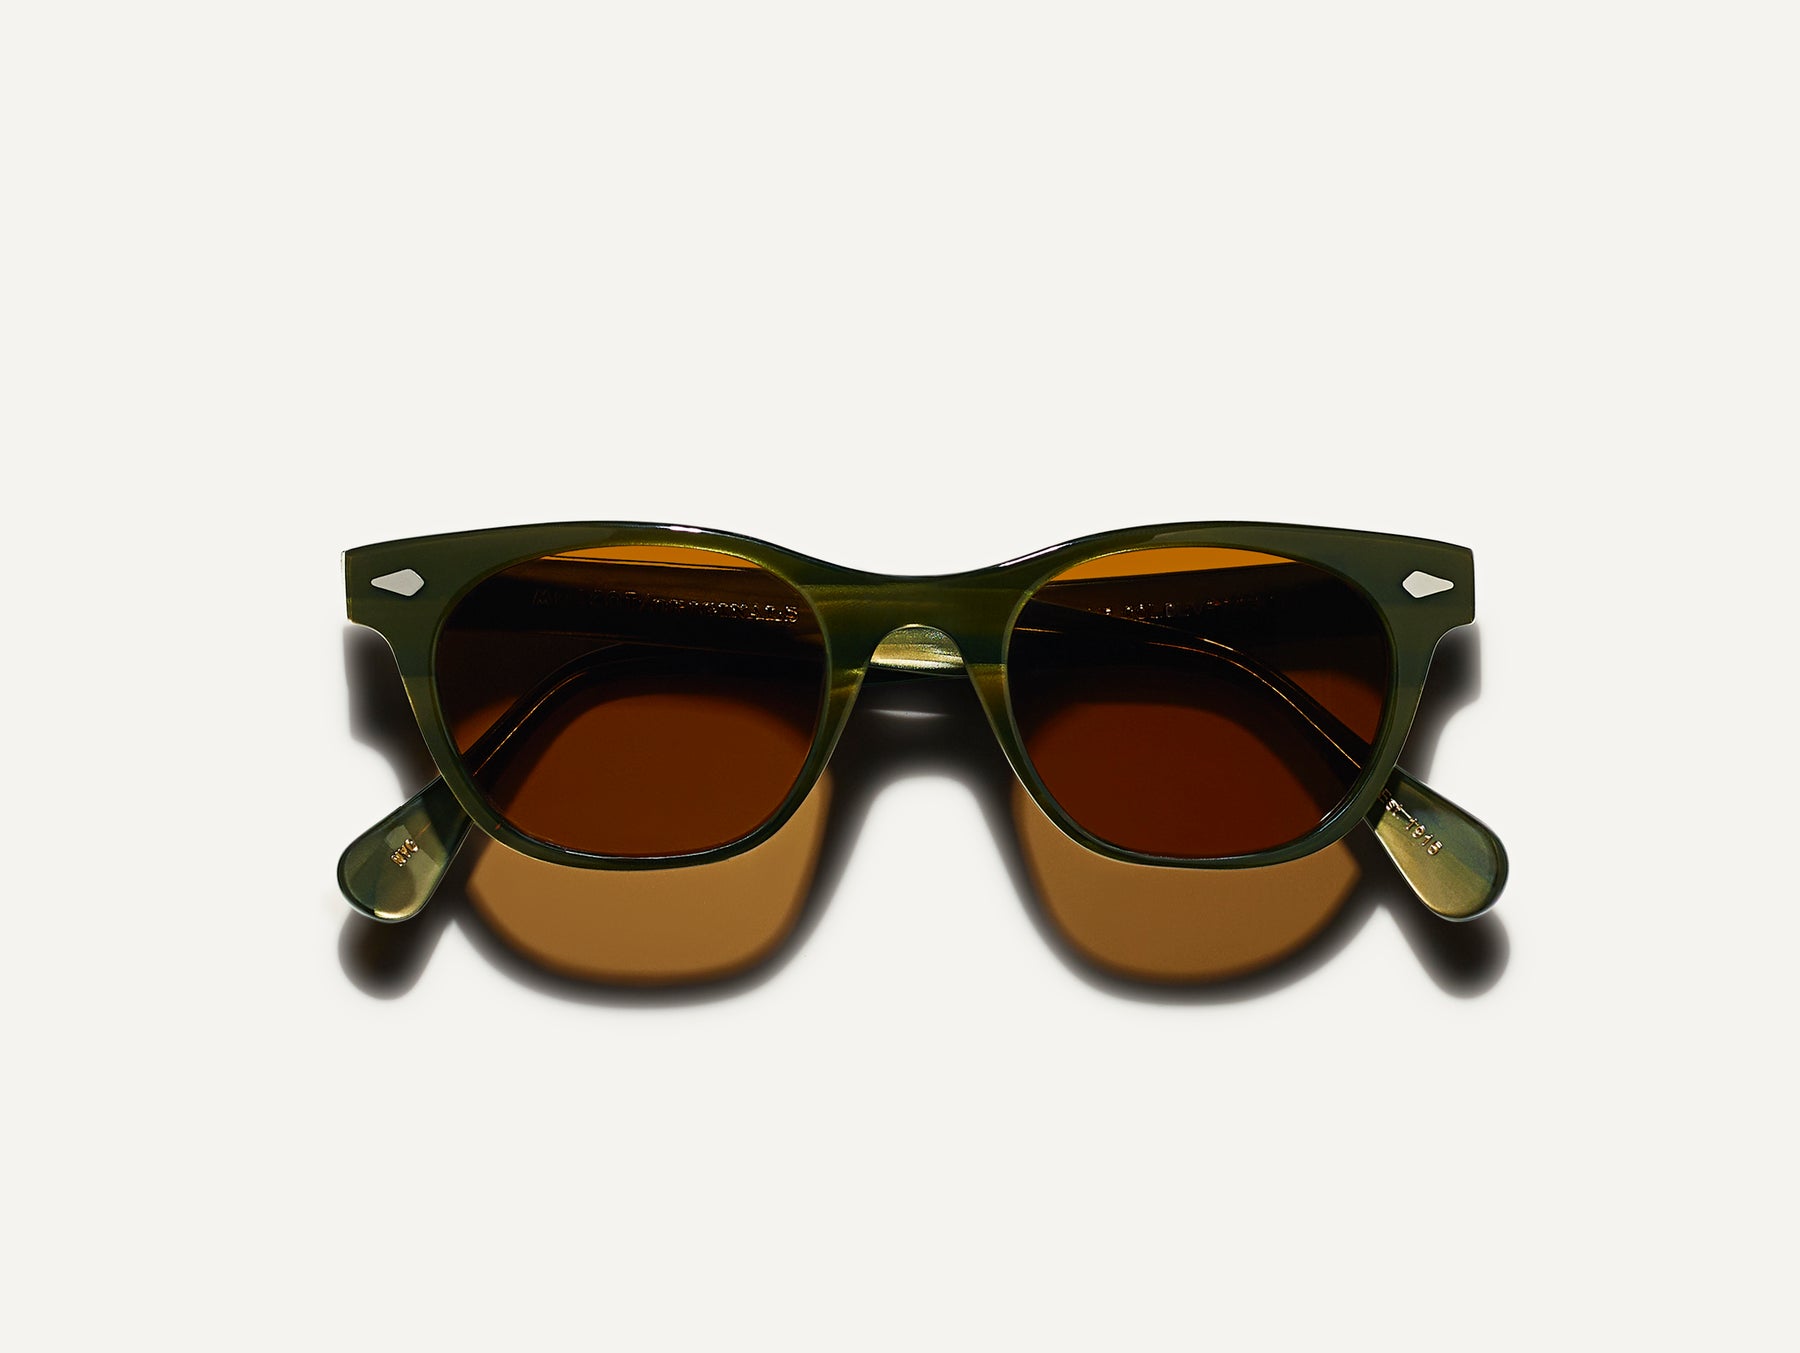 The BALEBUS SUN in Olive Bark with Cosmitan Brown Glass Lenses